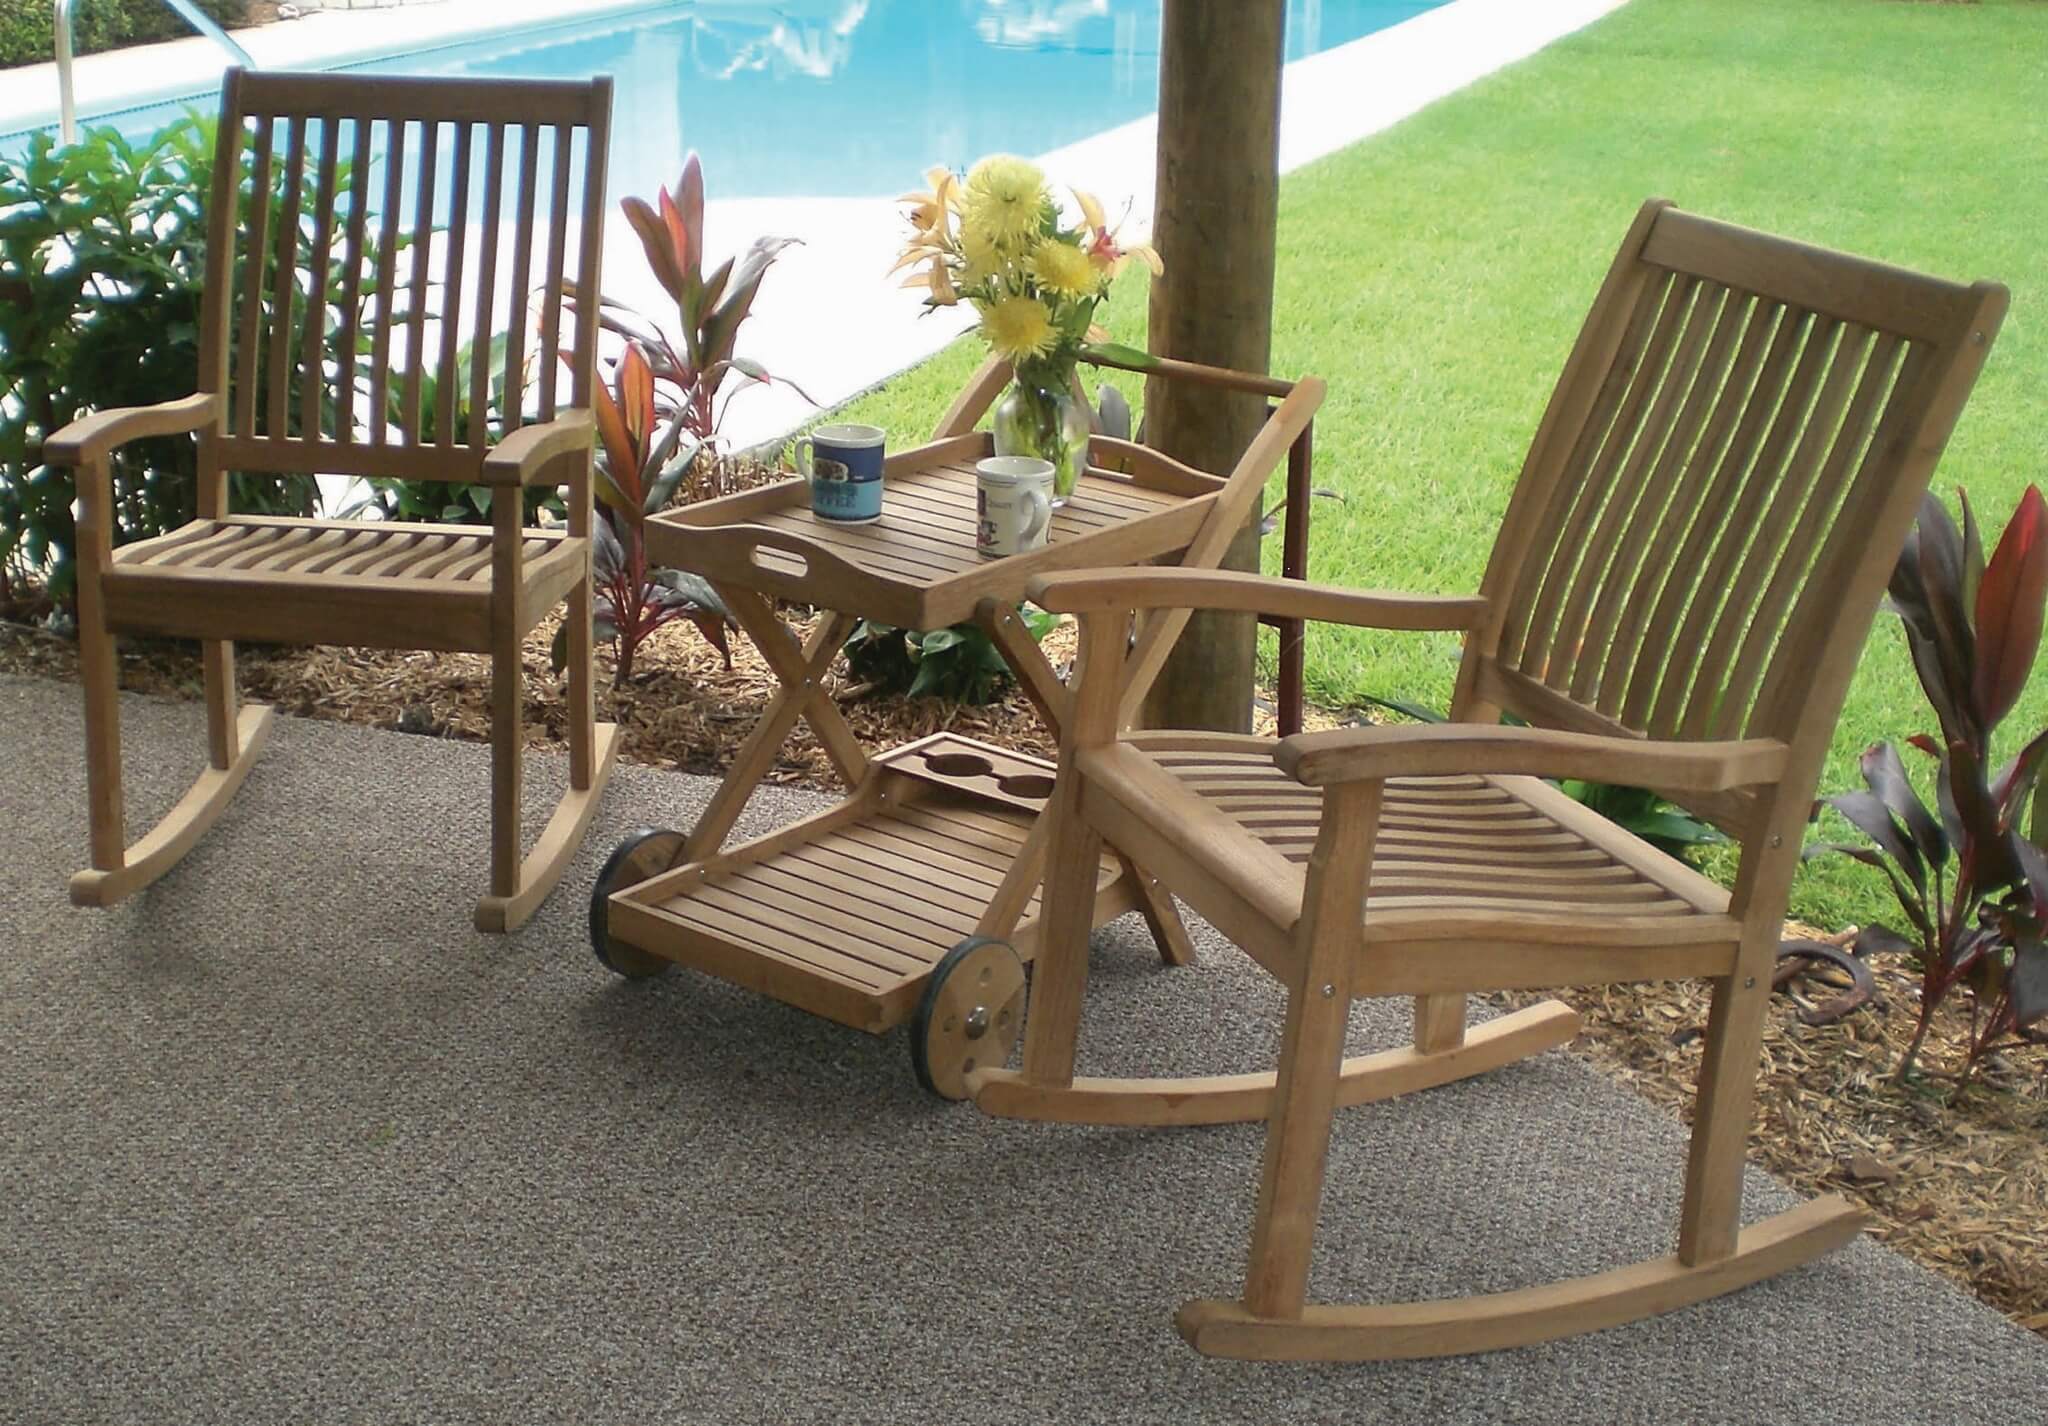 How To Protect Your Teak Furniture From Weather Damage